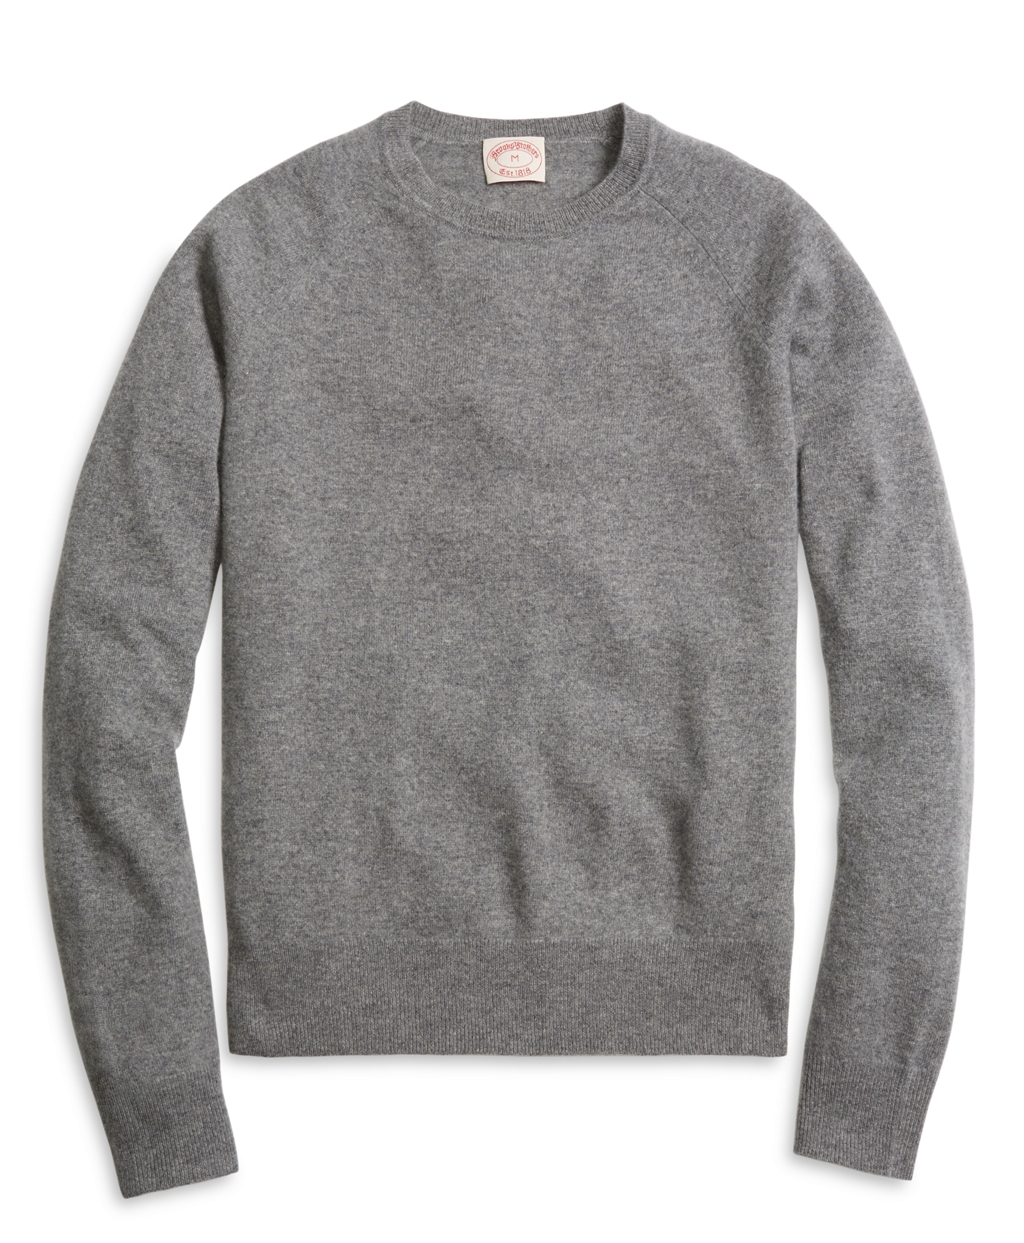 Brooks Brothers Cashmere Crewneck Sweater in Gray for Men - Lyst